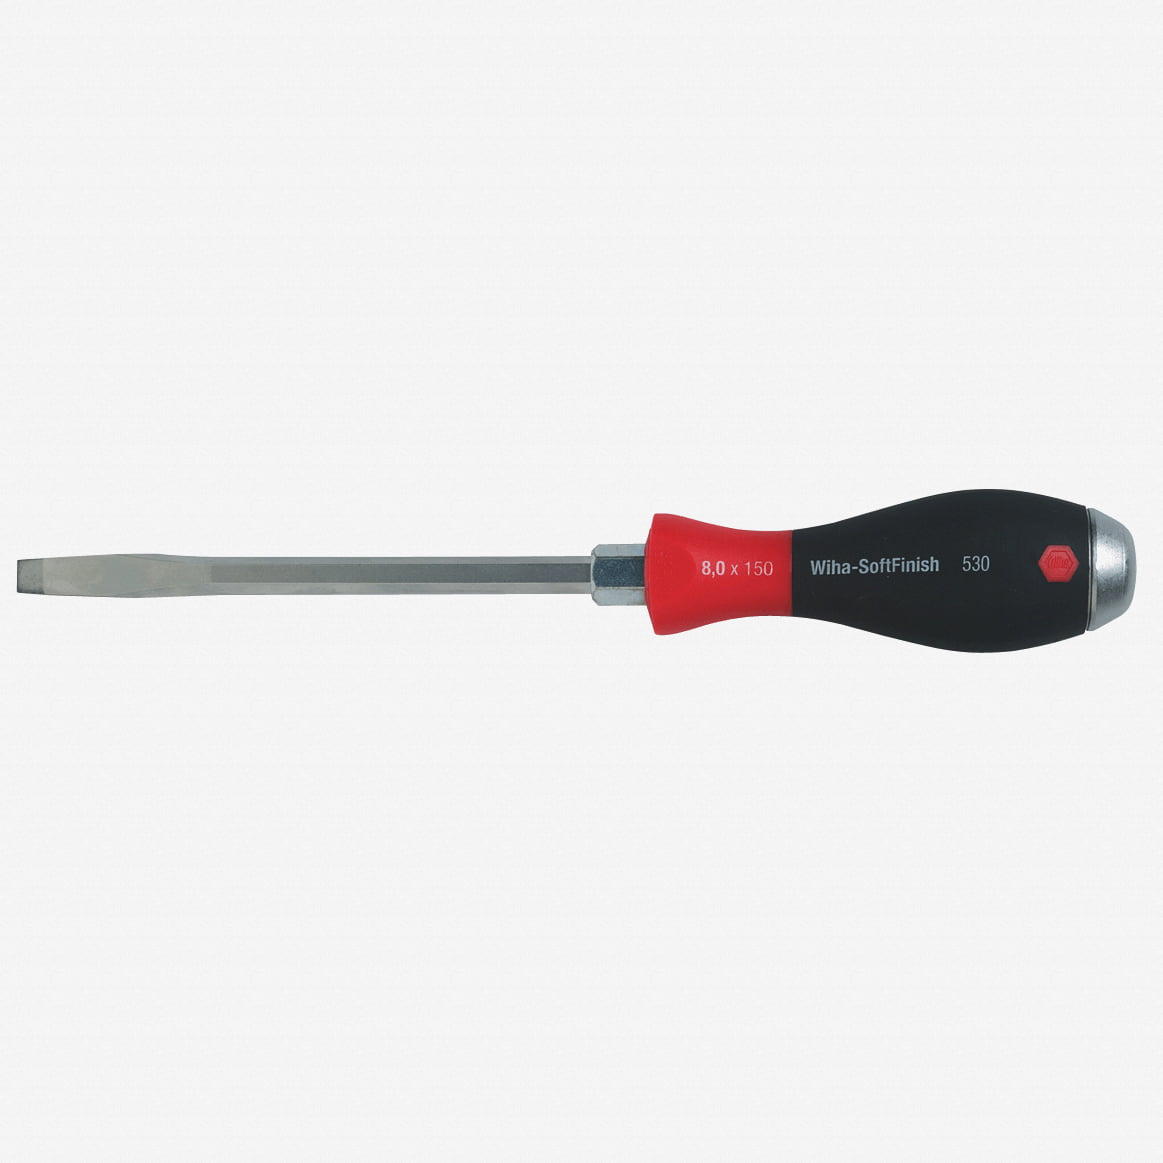 8.0 x 150mm Wiha 53027 Slotted Screwdriver with SoftFinish Handle and Solid Metal Cap 